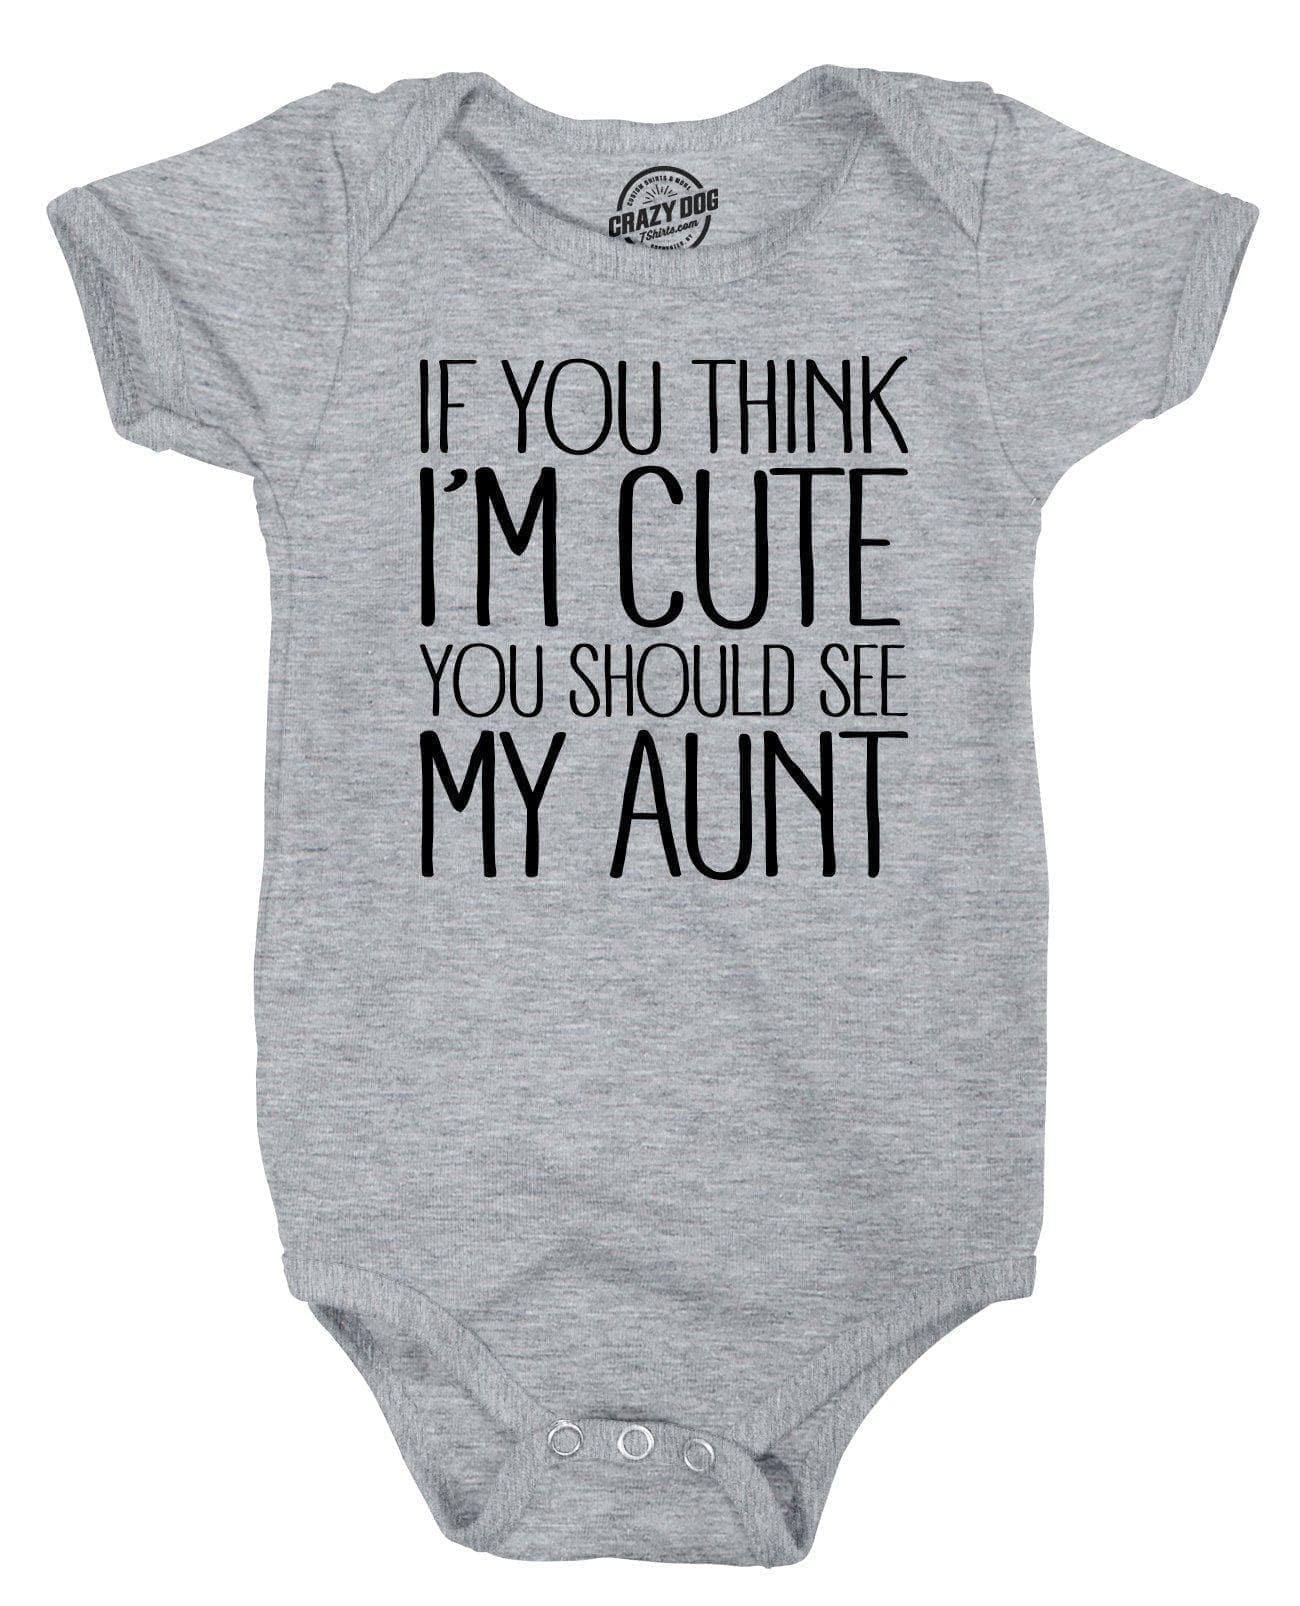 If You Think I’m Cute You Should See My Aunt Baby Bodysuit - Crazy Dog T-Shirts